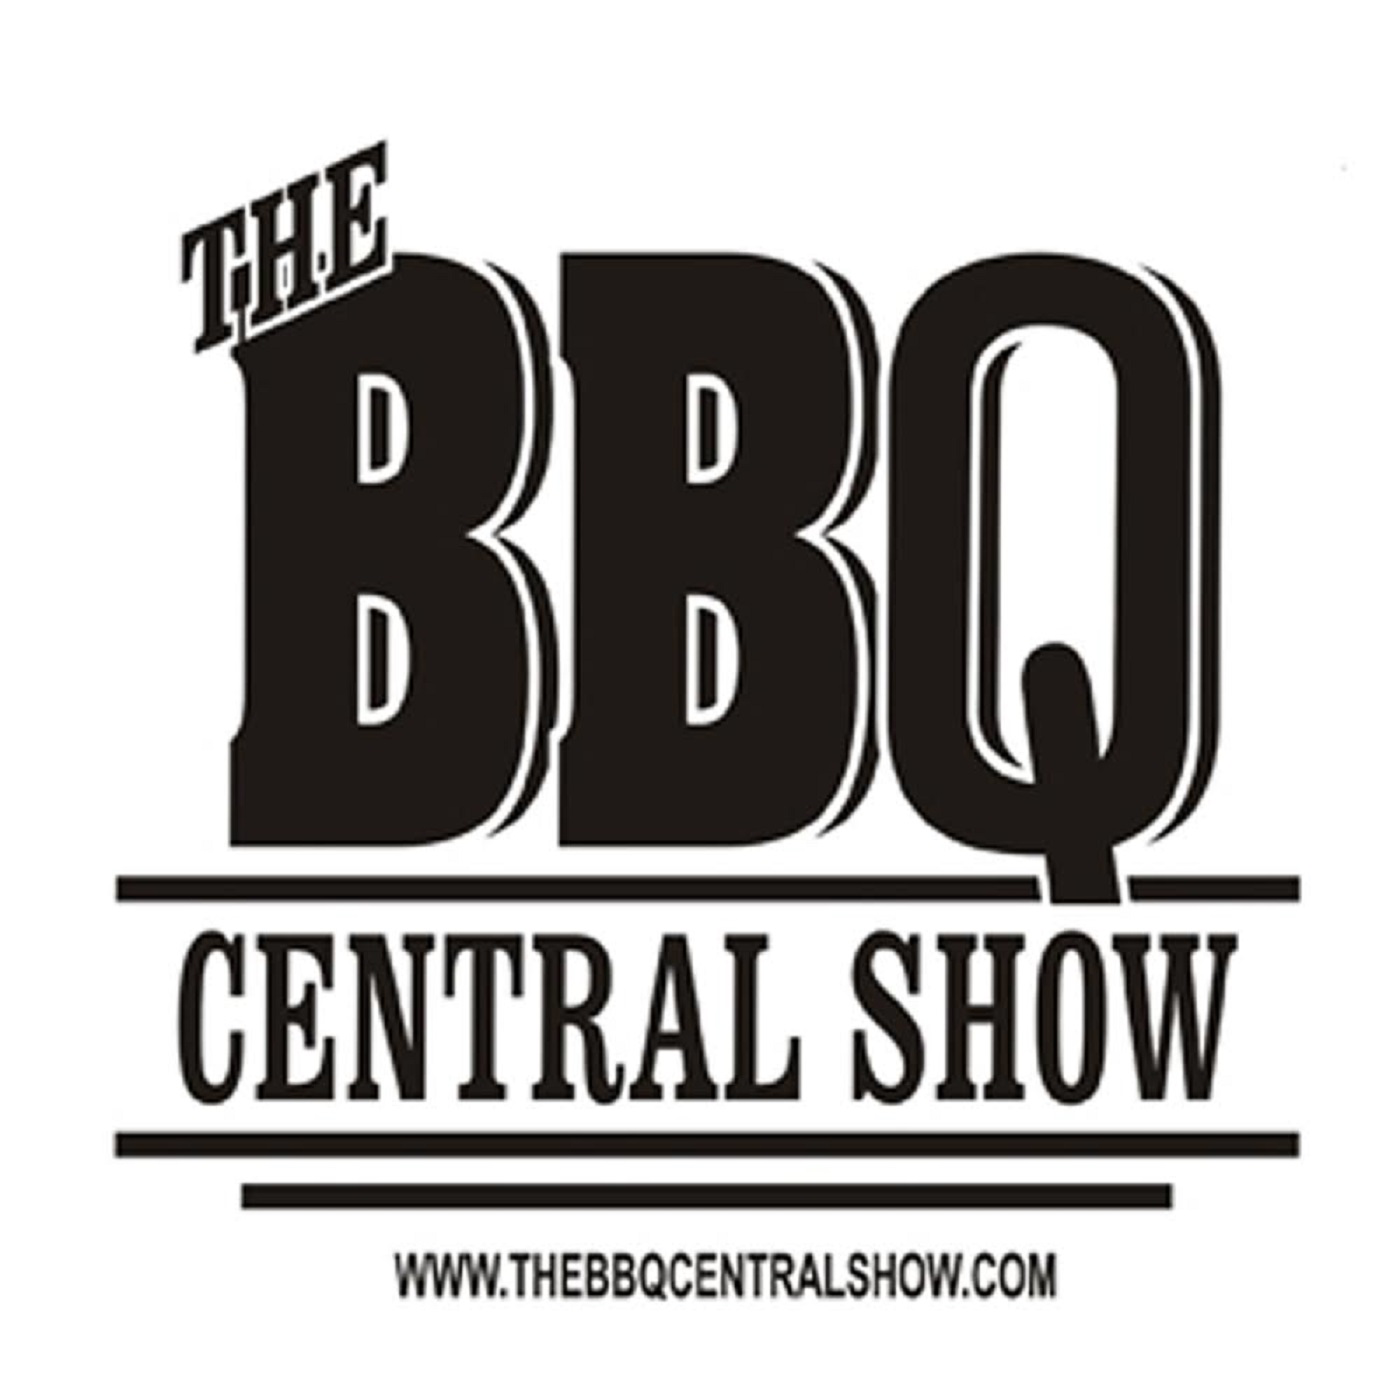 A highlight from 100% Assurity Picks With the Embedded Correspondents & The 2021 BBQ Central show Guest HOF Inductions!